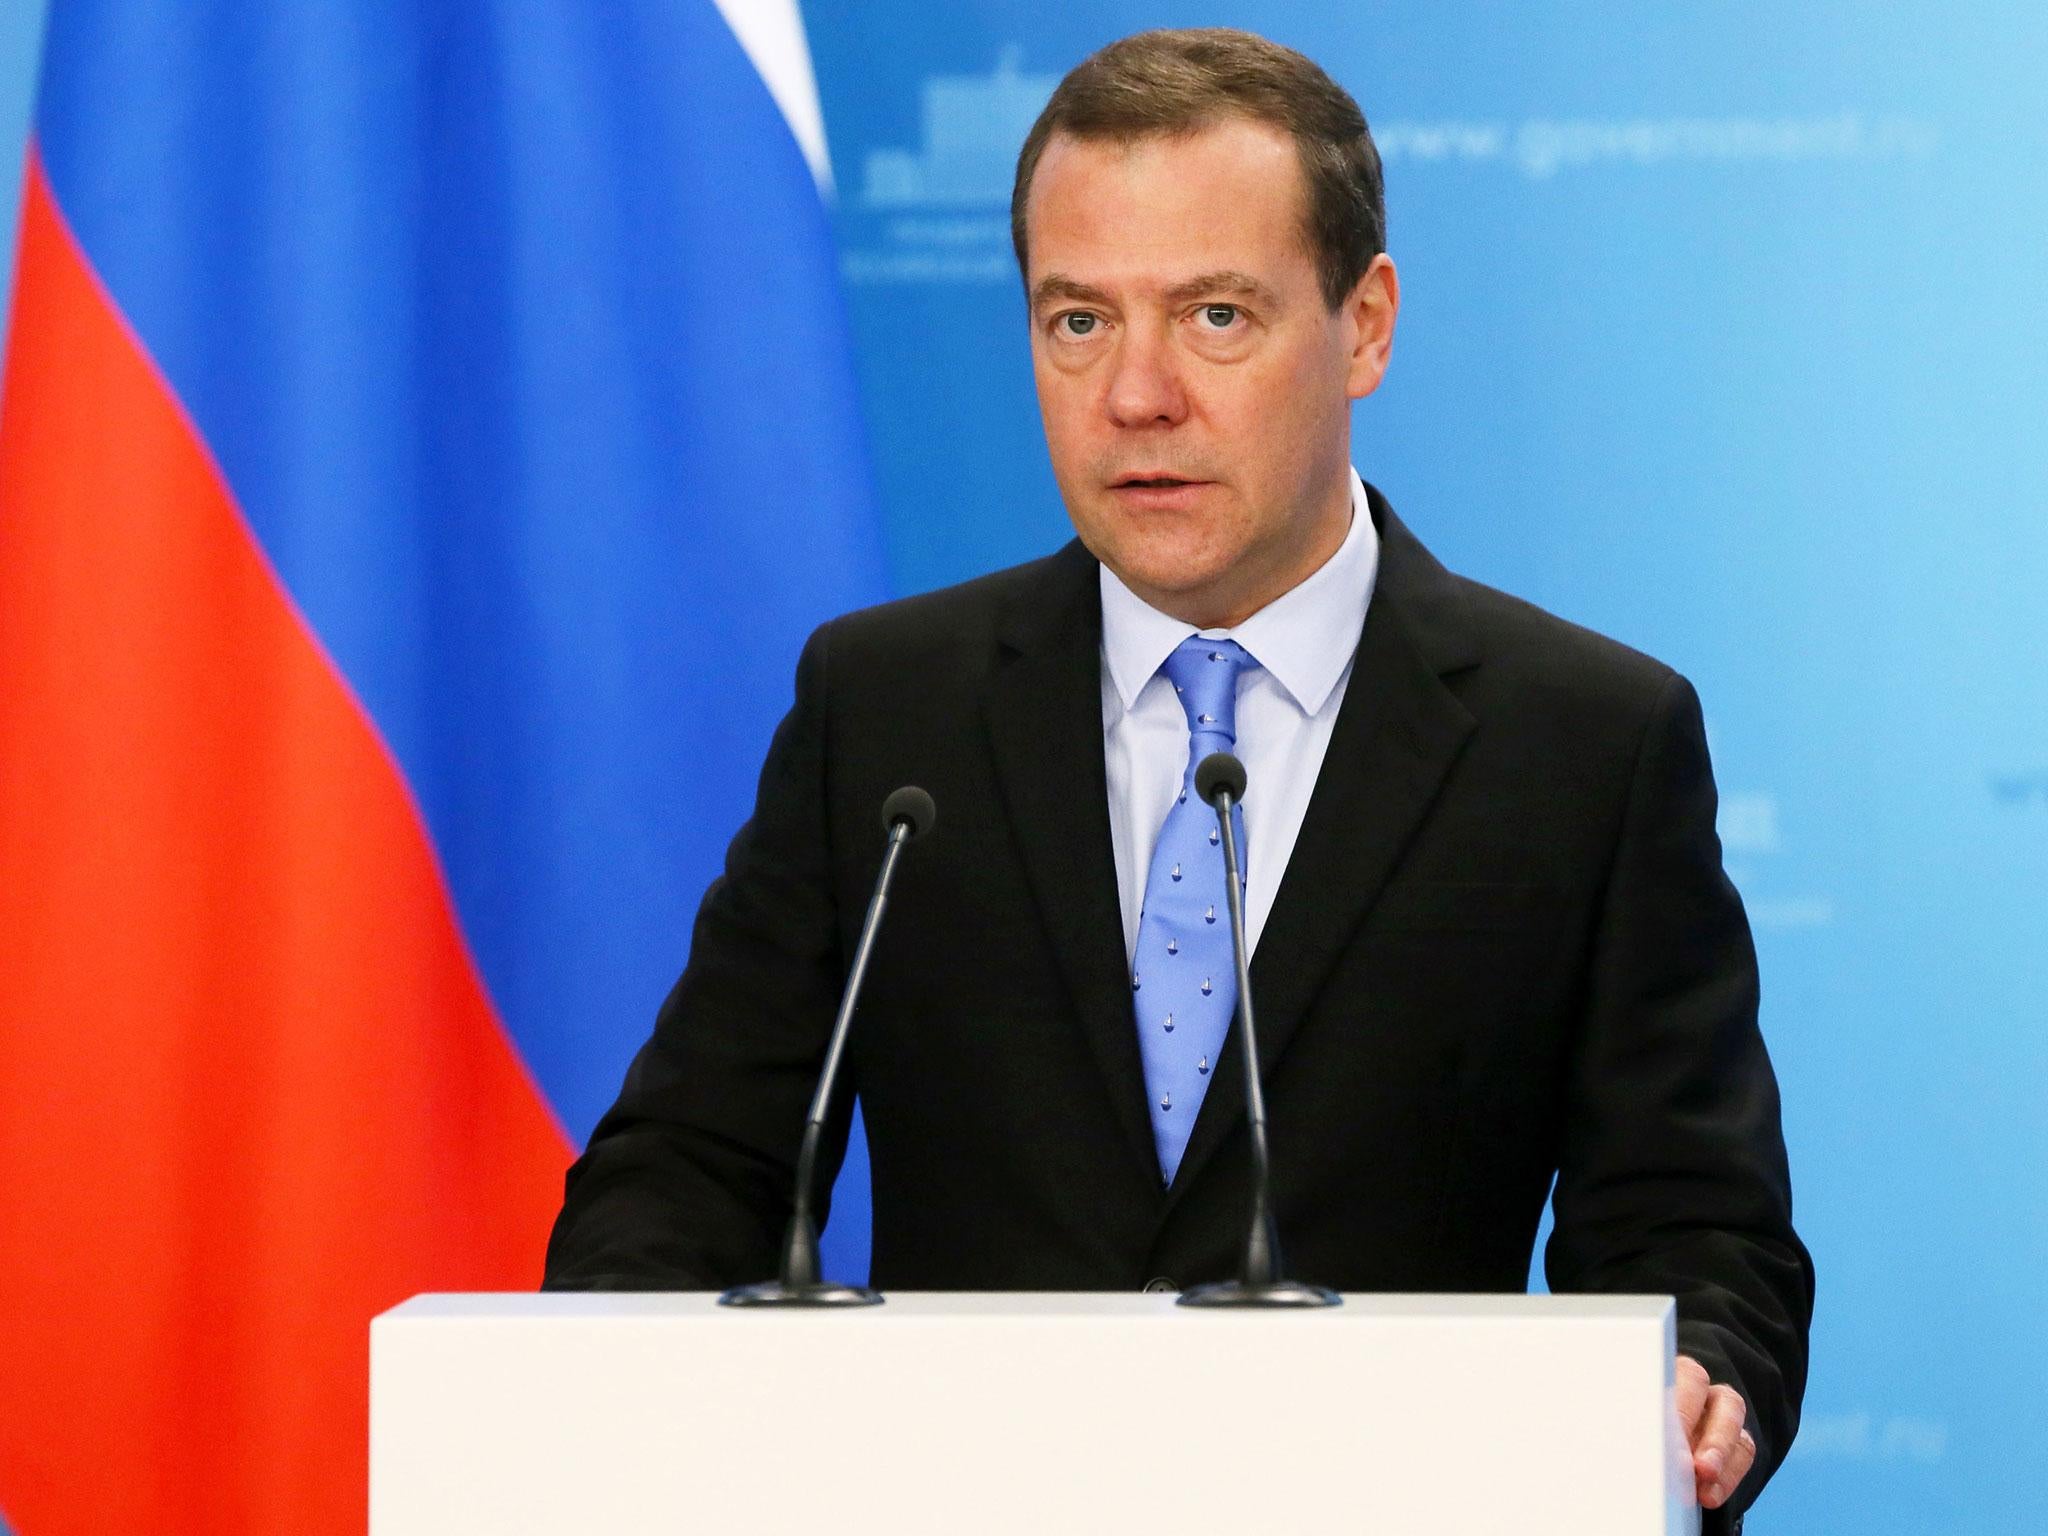 Russian Prime Minister Dmitry Medvedev called the allegations 'political manipulations'